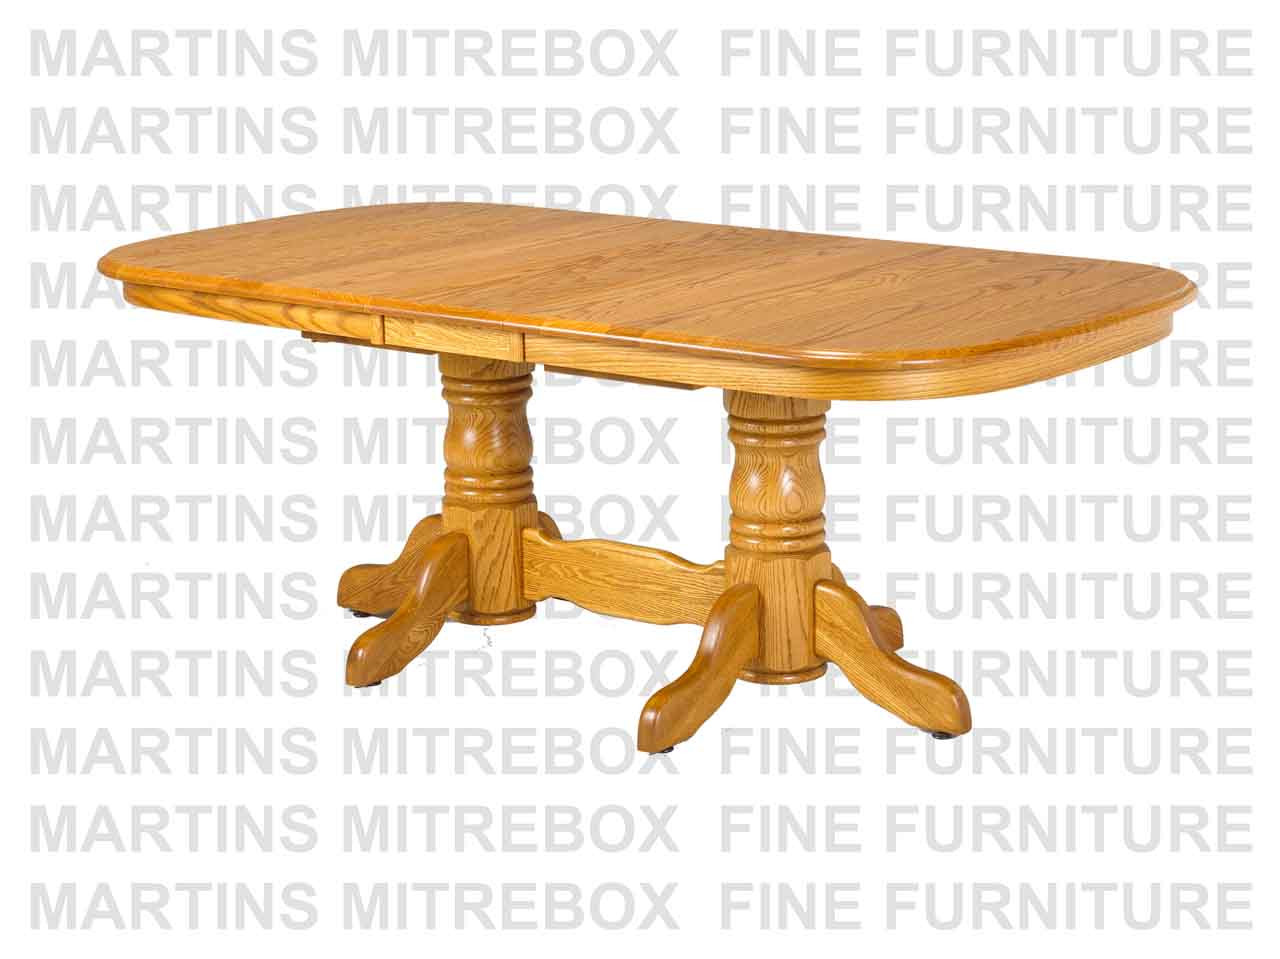 Oak Martin Collection Double Pedestal Table 48''D x 96''W x 30''H. Table Has 1.25'' Thick Top.